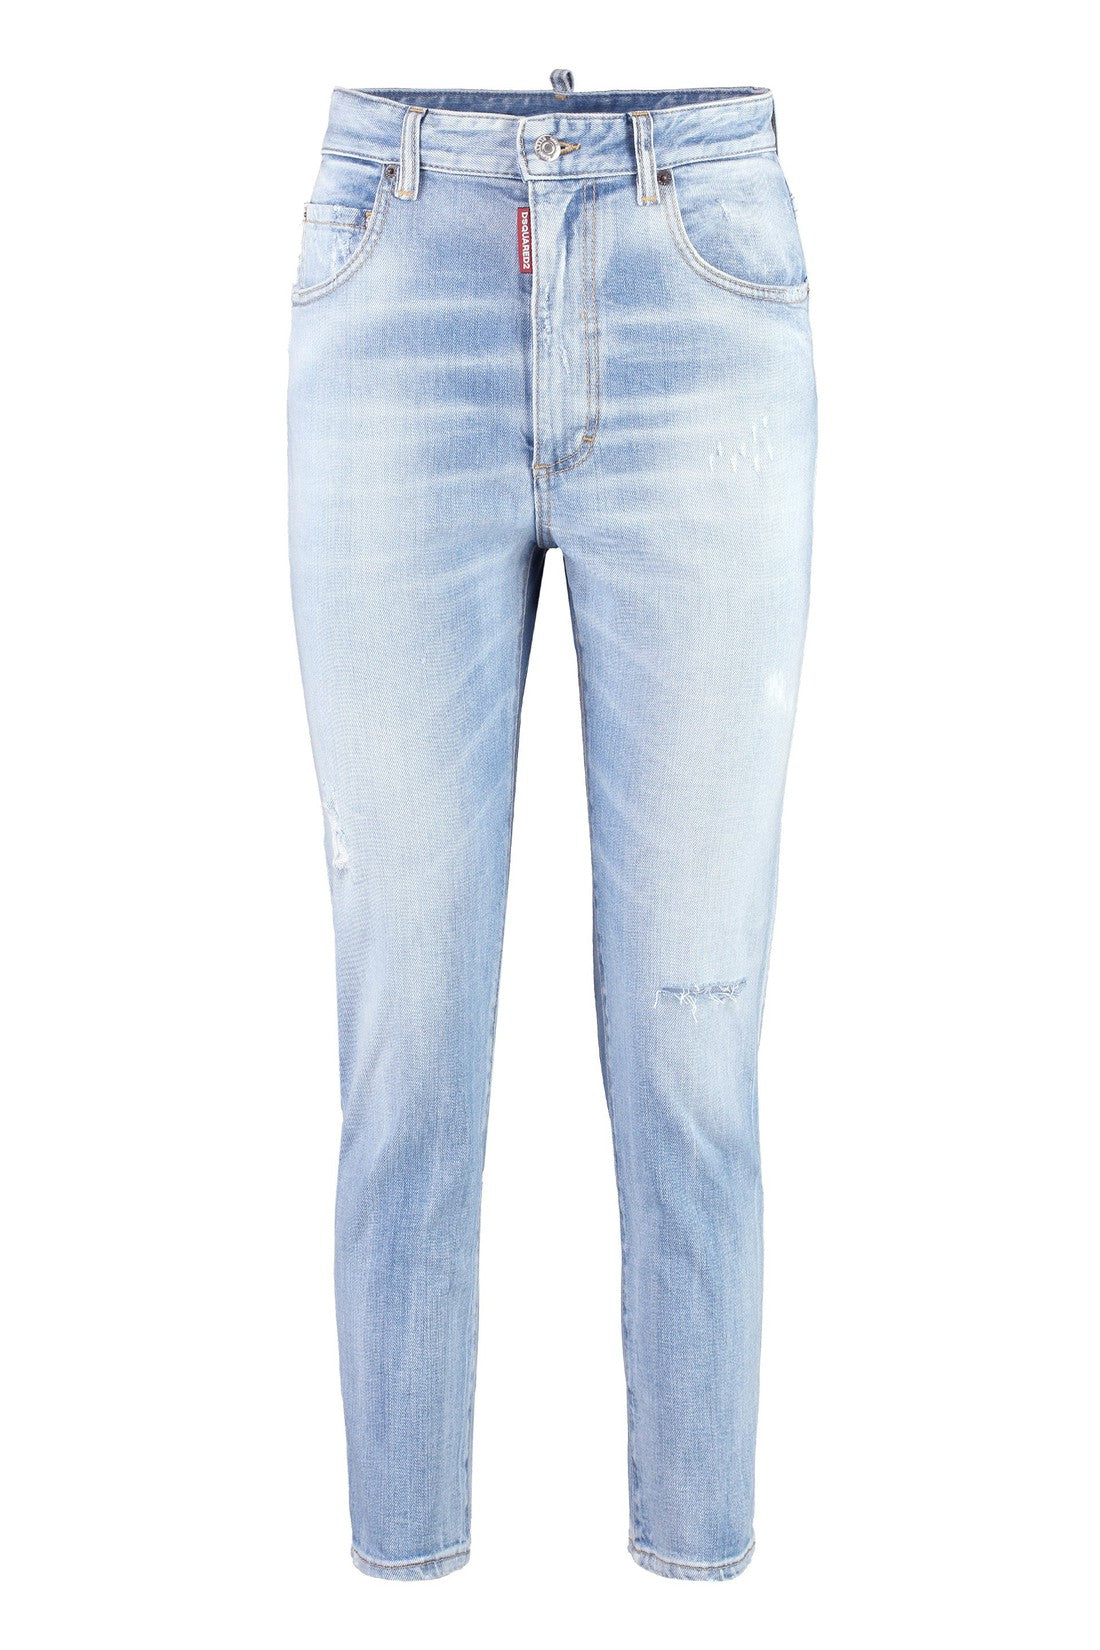 Dsquared2-OUTLET-SALE-Twiggy cropped jeans-ARCHIVIST